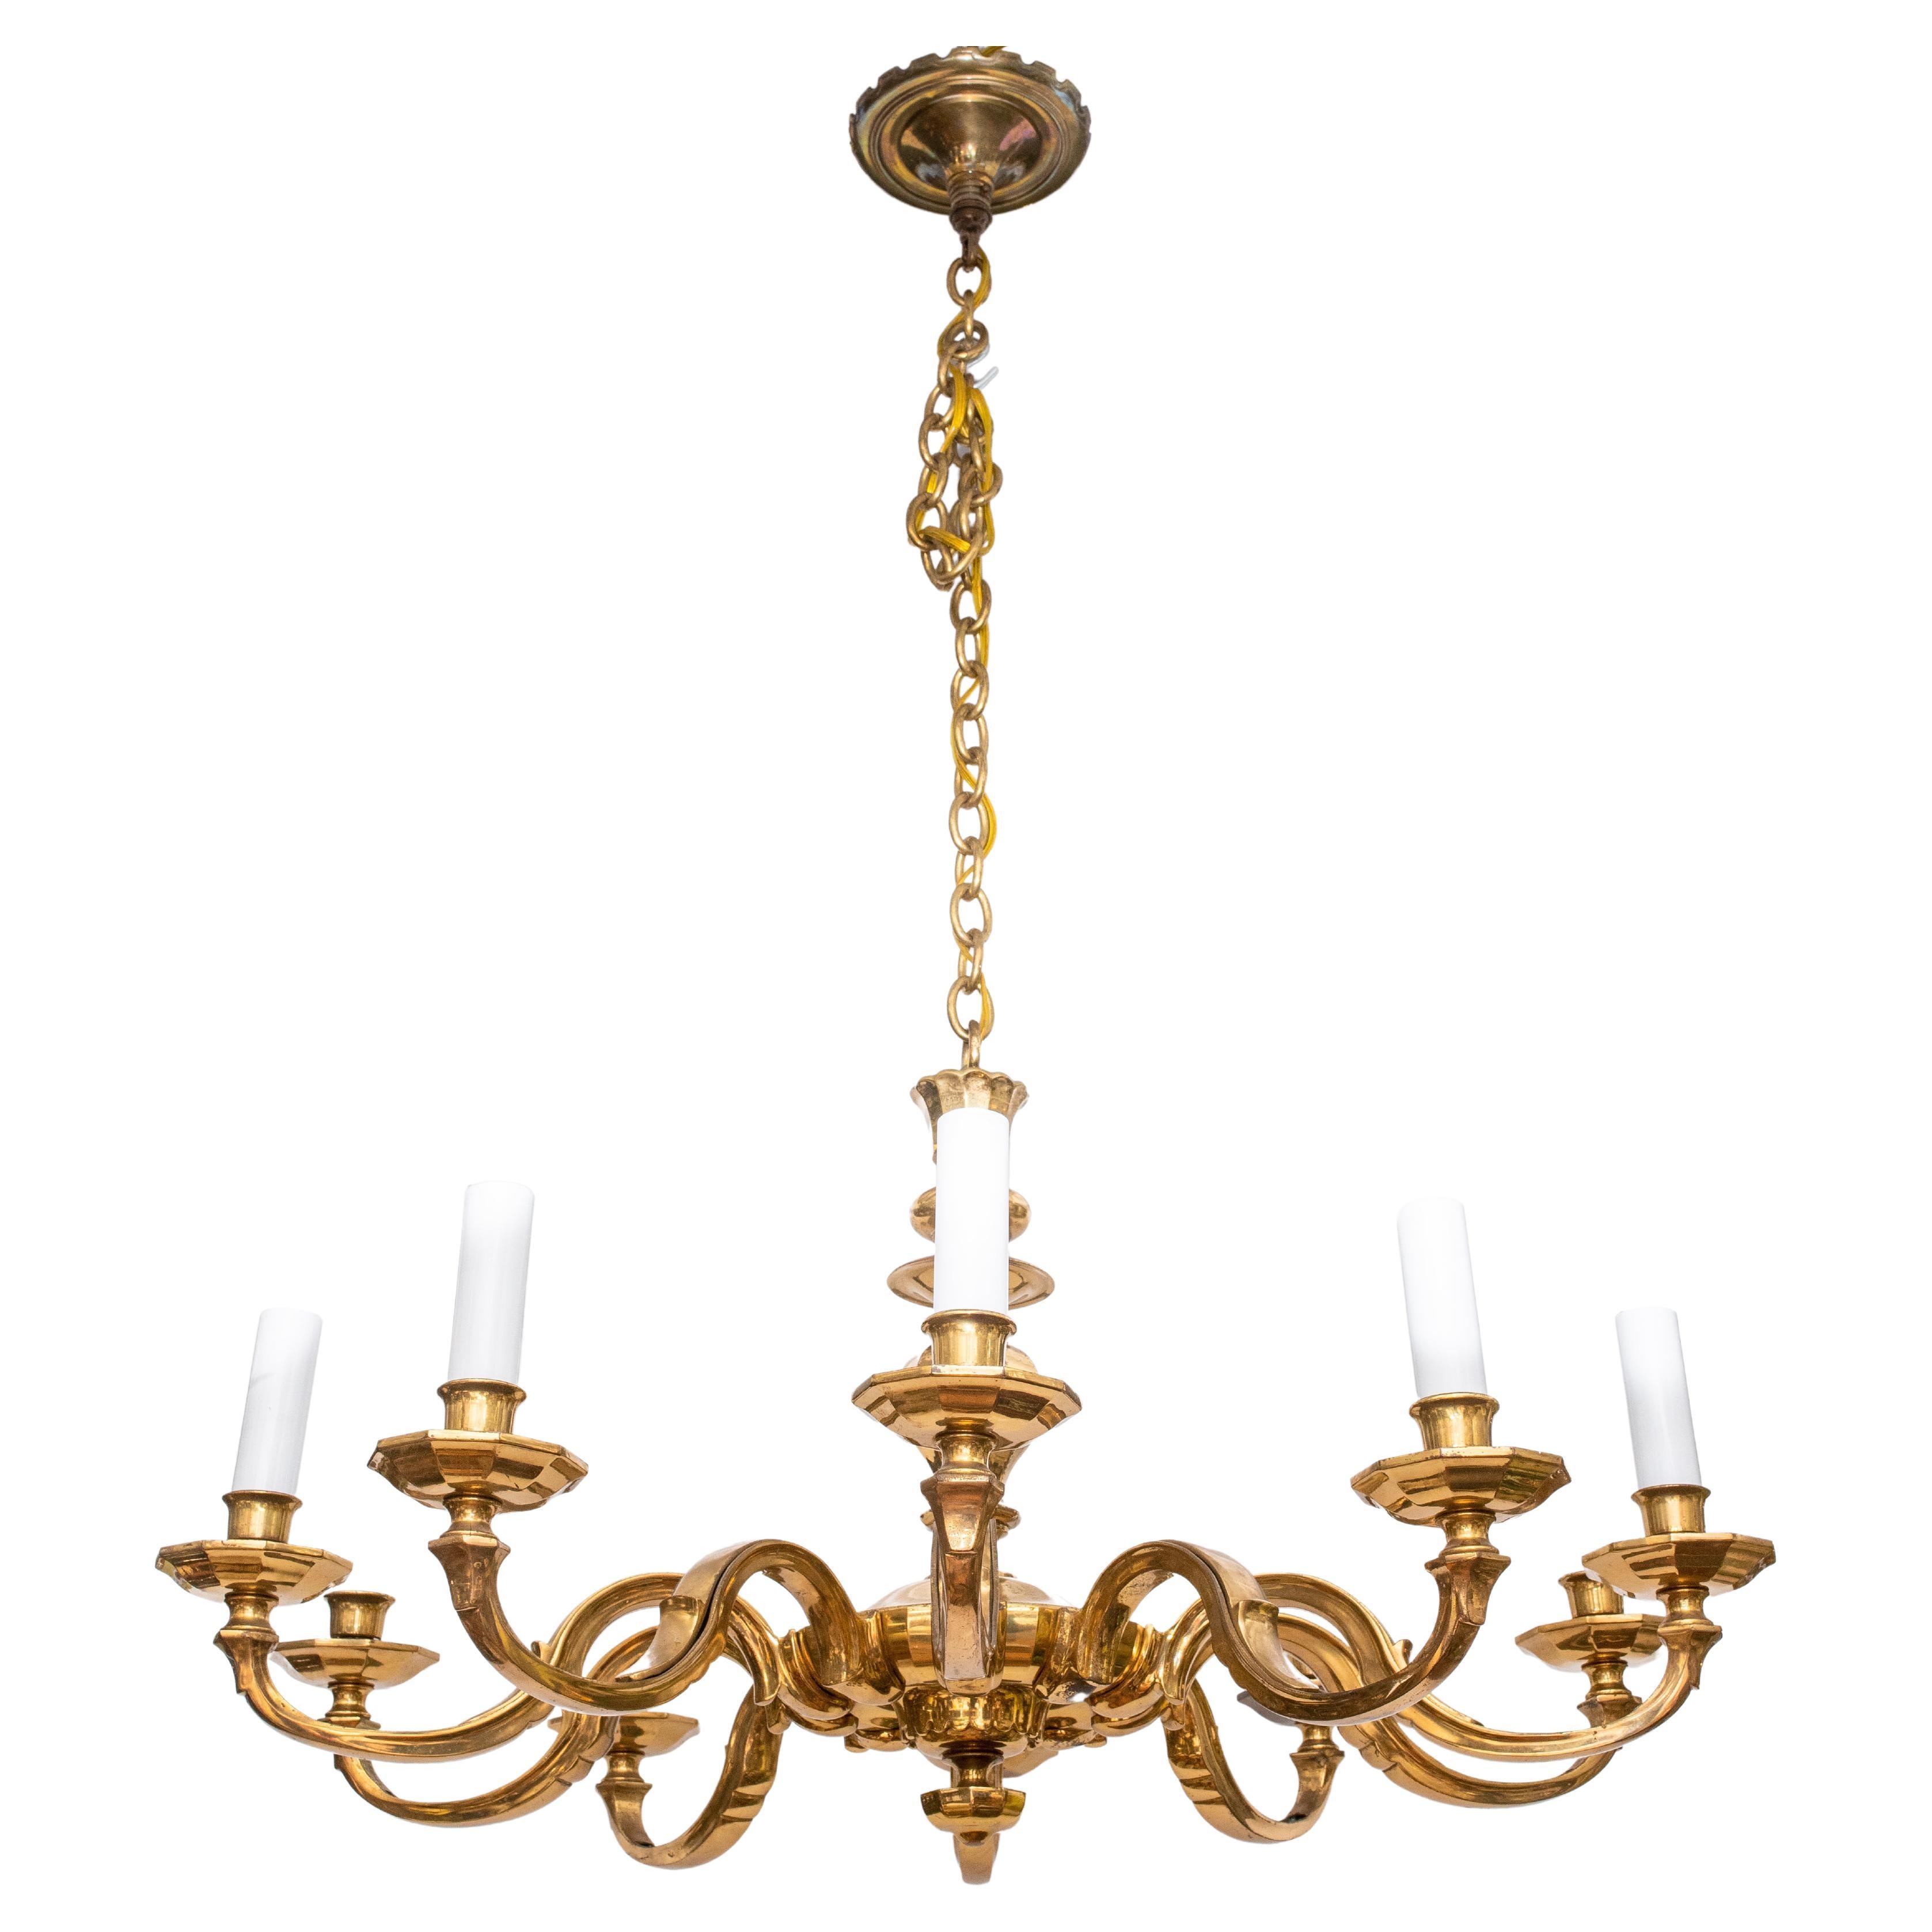 Large Solid Brass 10 Arm Chandelier